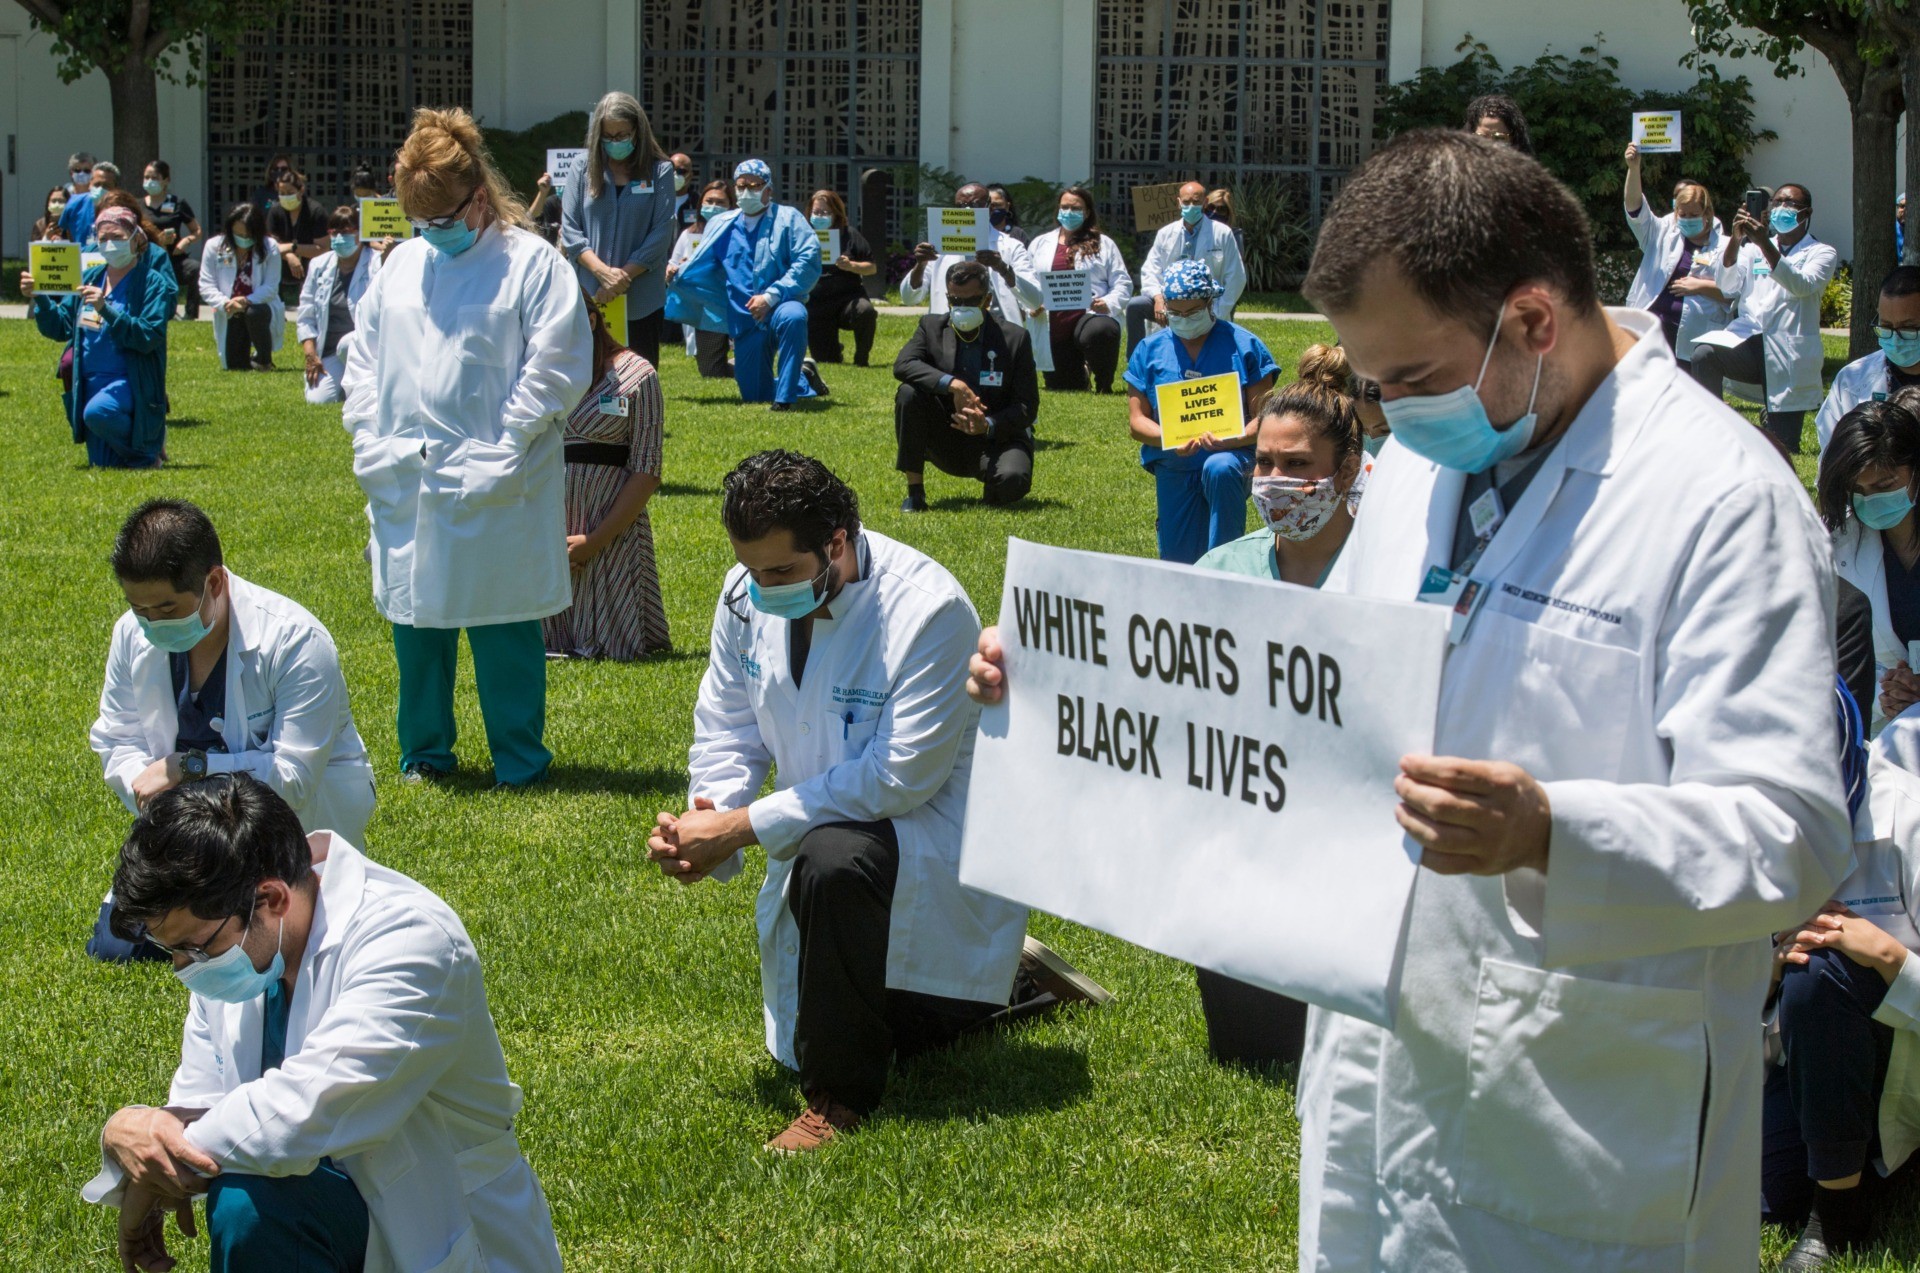 People kneel as doctors, nurses and other health care workers participate in a "White Coats for Black Lives" event in solidarity with George Floyd and other black Americans killed by police officers, at the Queen of the Valley Hospital in West Covina, California on June 11, 2020. - George Floyd's killing by a police officer touched off worldwide protests over racial and social injustice. (Photo by Mark RALSTON / AFP) (Photo by MARK RALSTON/AFP via Getty Images)